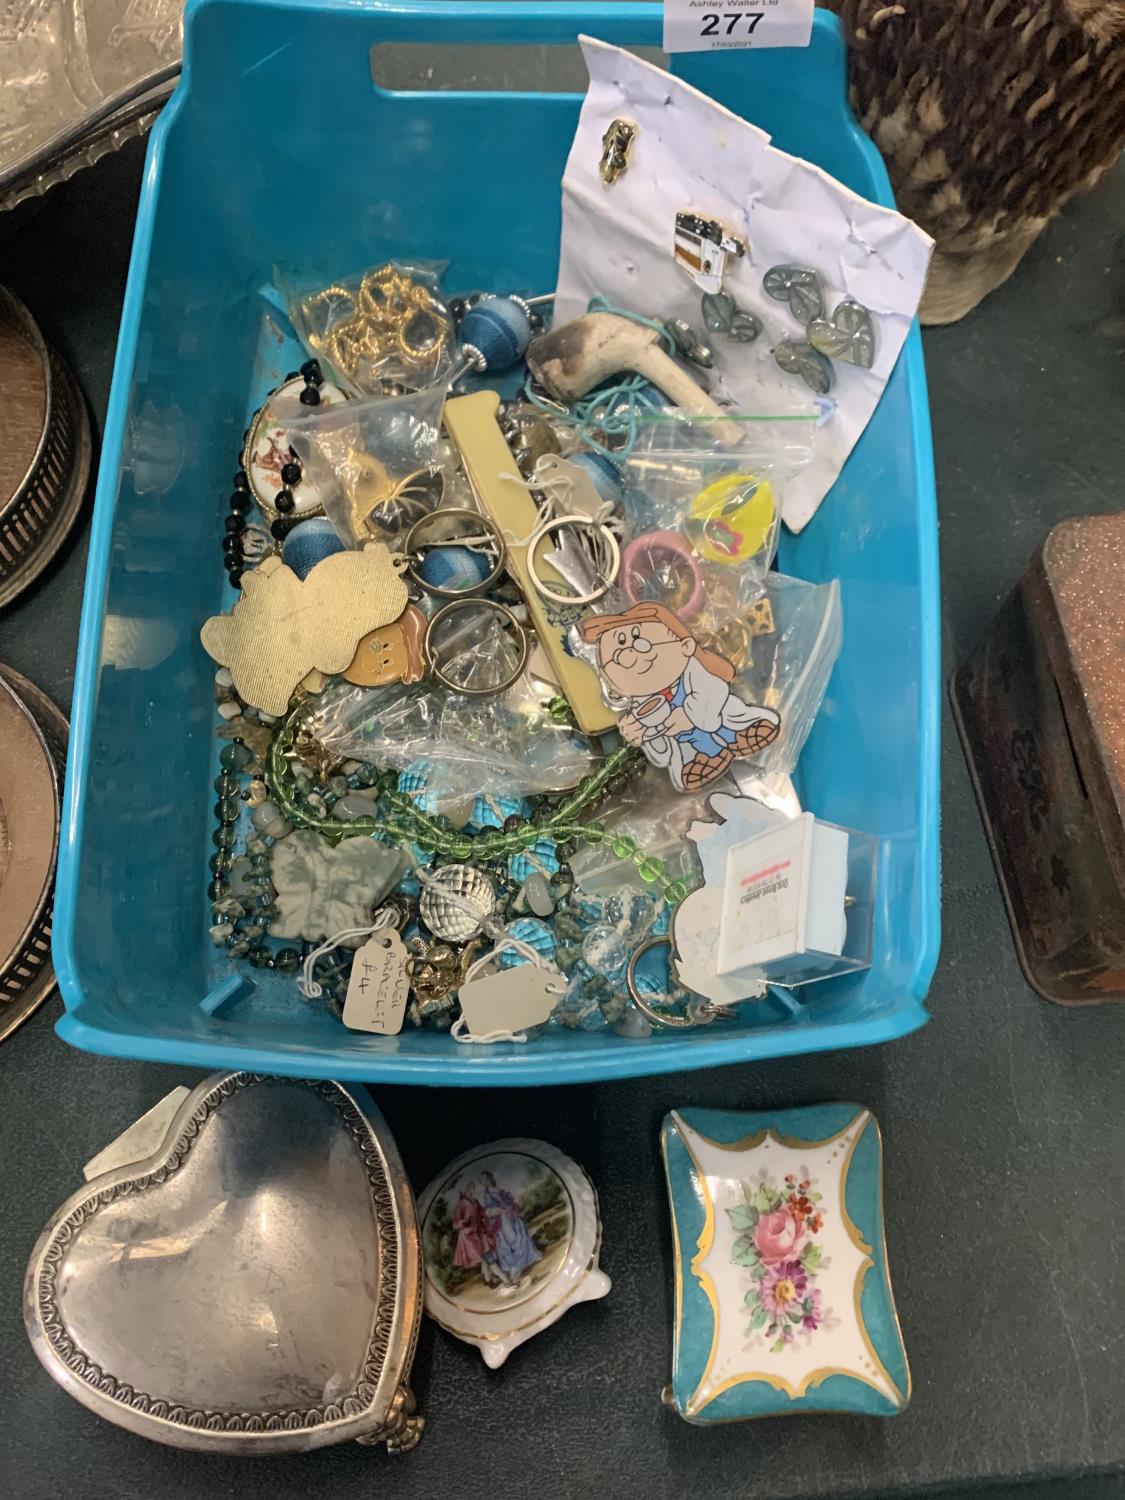 A COLLECTION OF COSTUME JEWELLERY, HEART SHAPED TRINKET BOX, PIN BADGES ETC